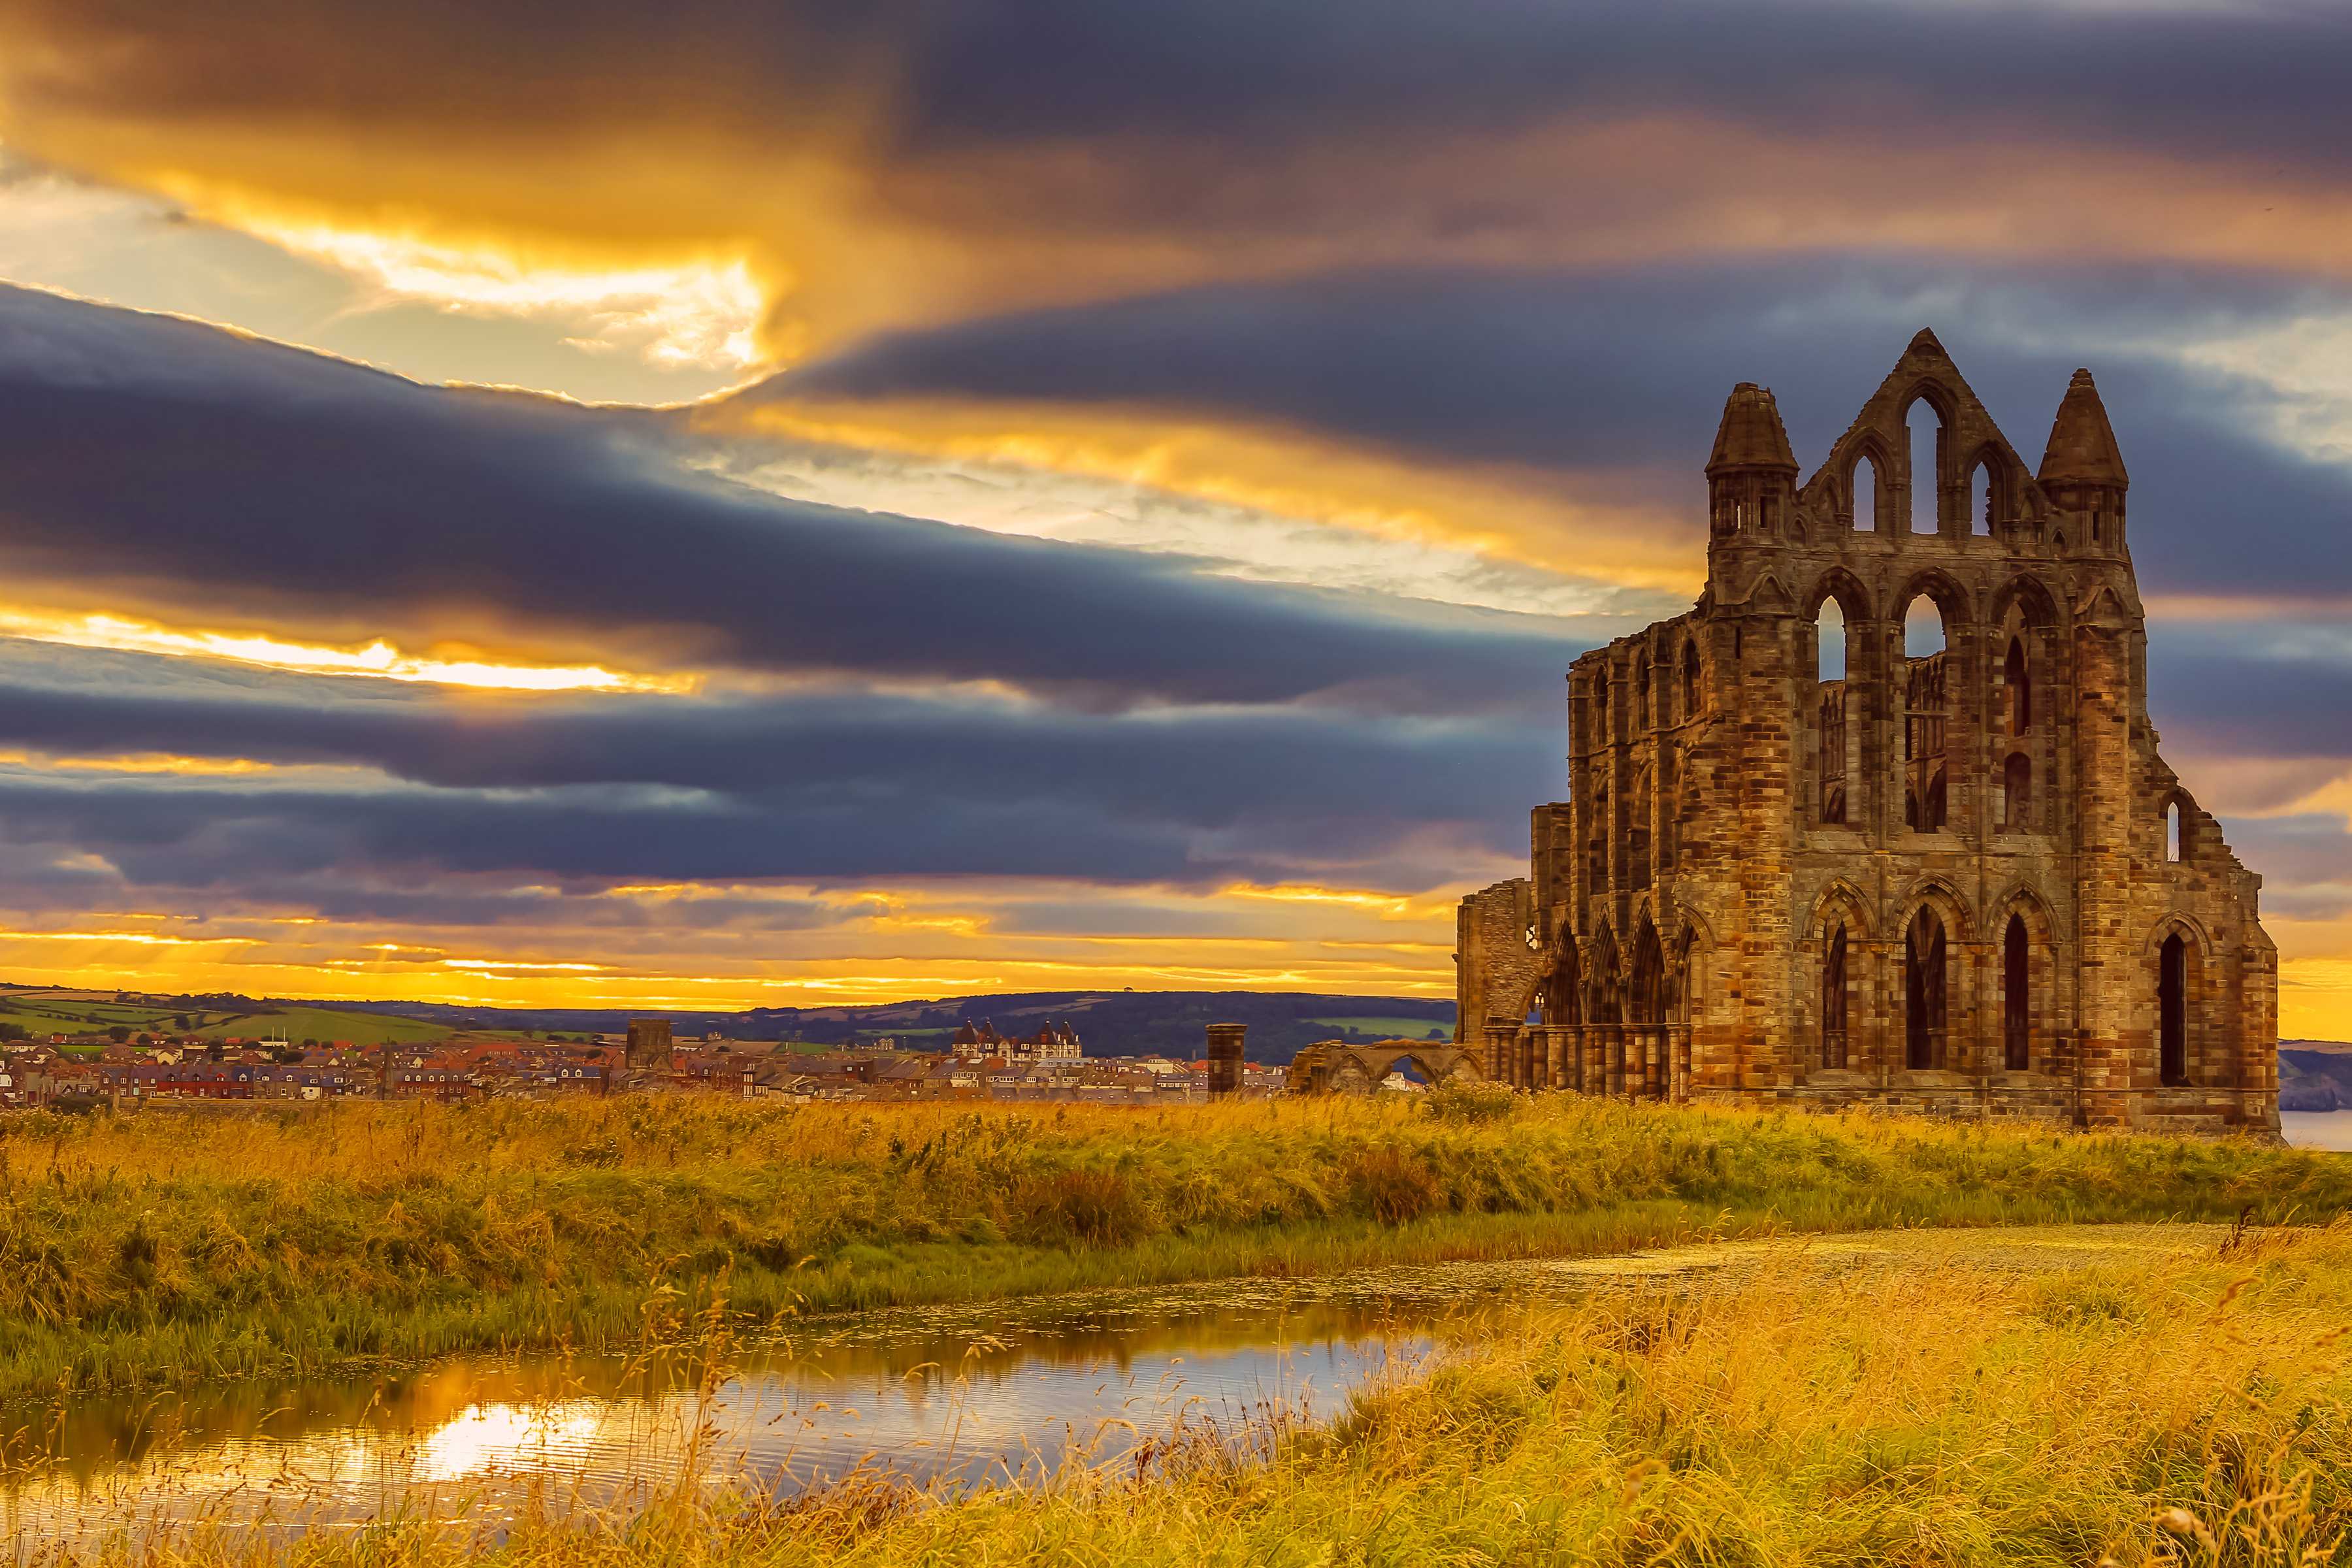 Pics of Whitby Abbey